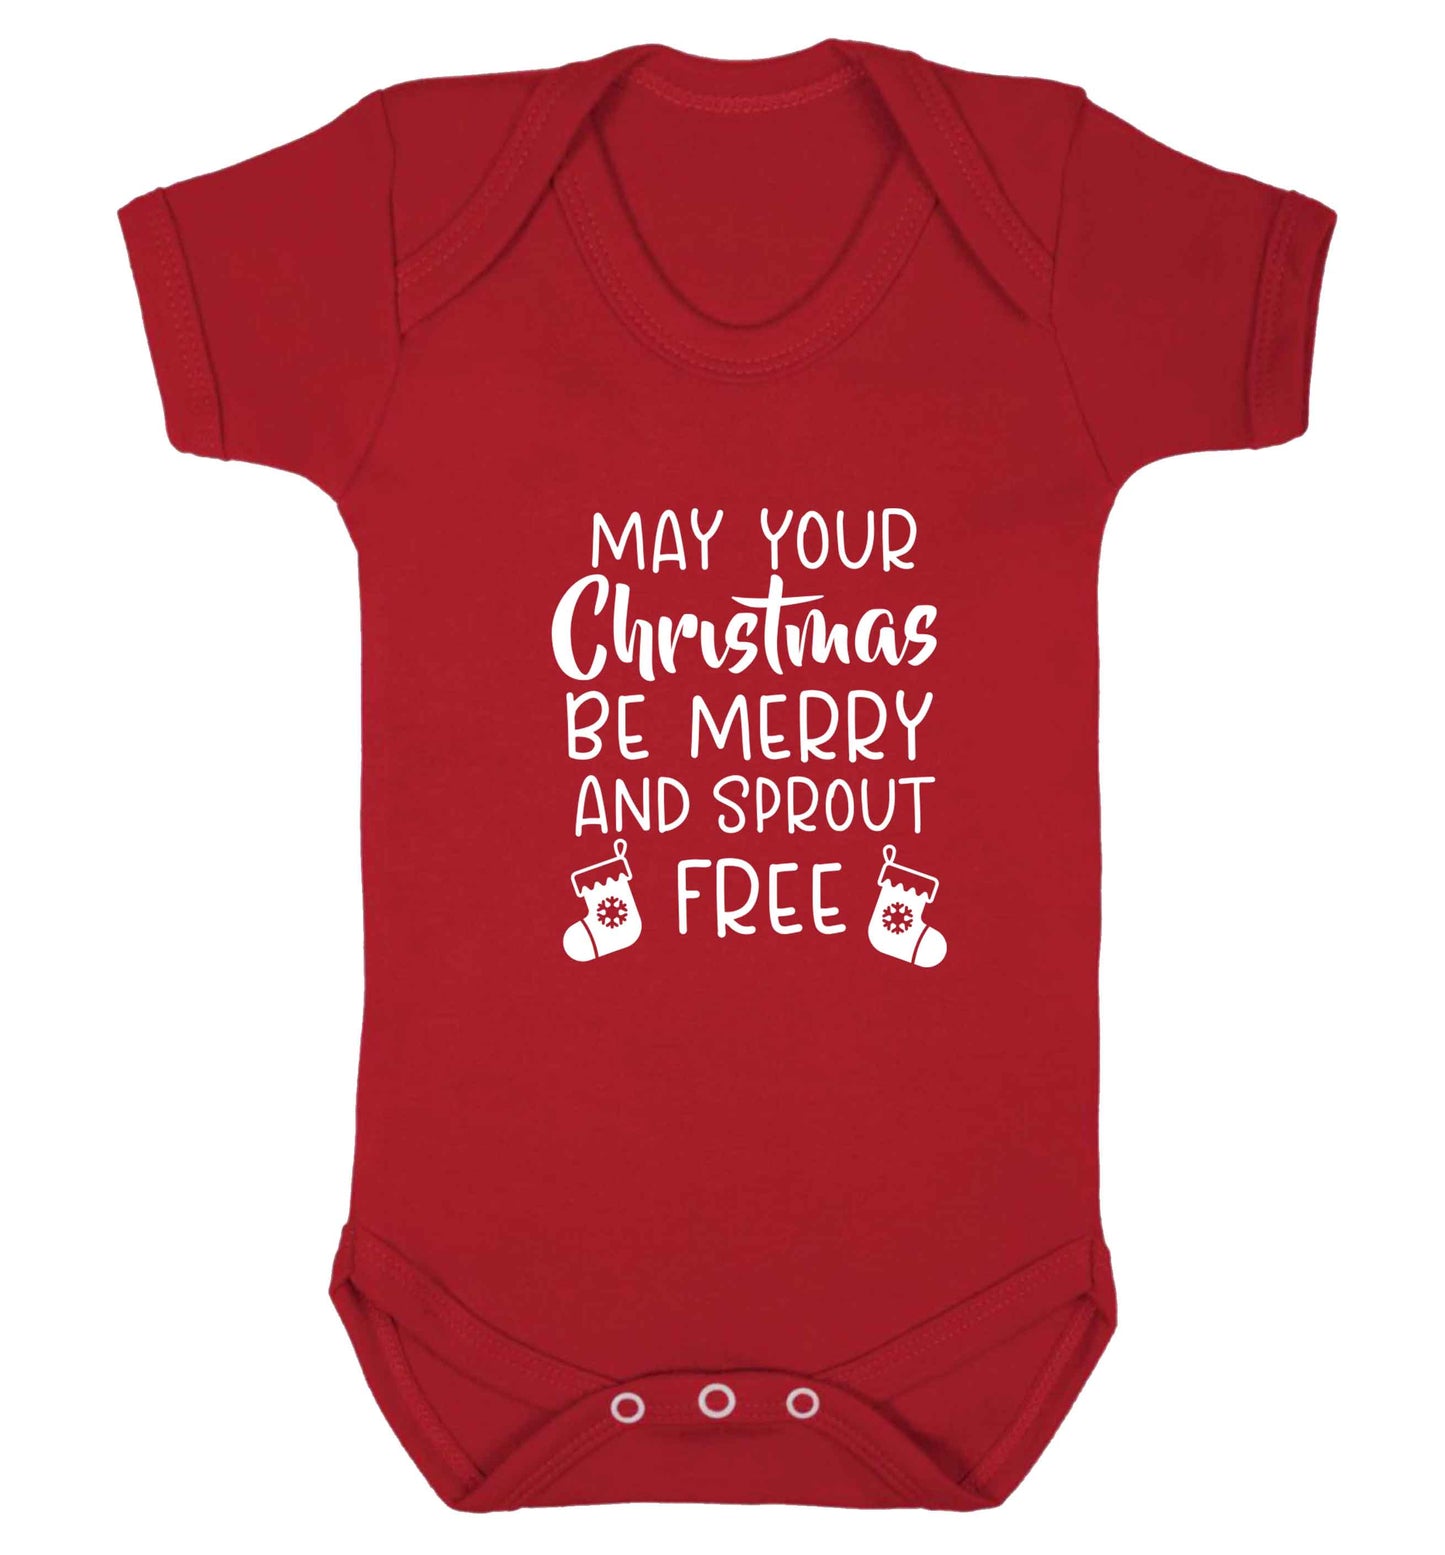 May your Christmas be merry and sprout free baby vest red 18-24 months